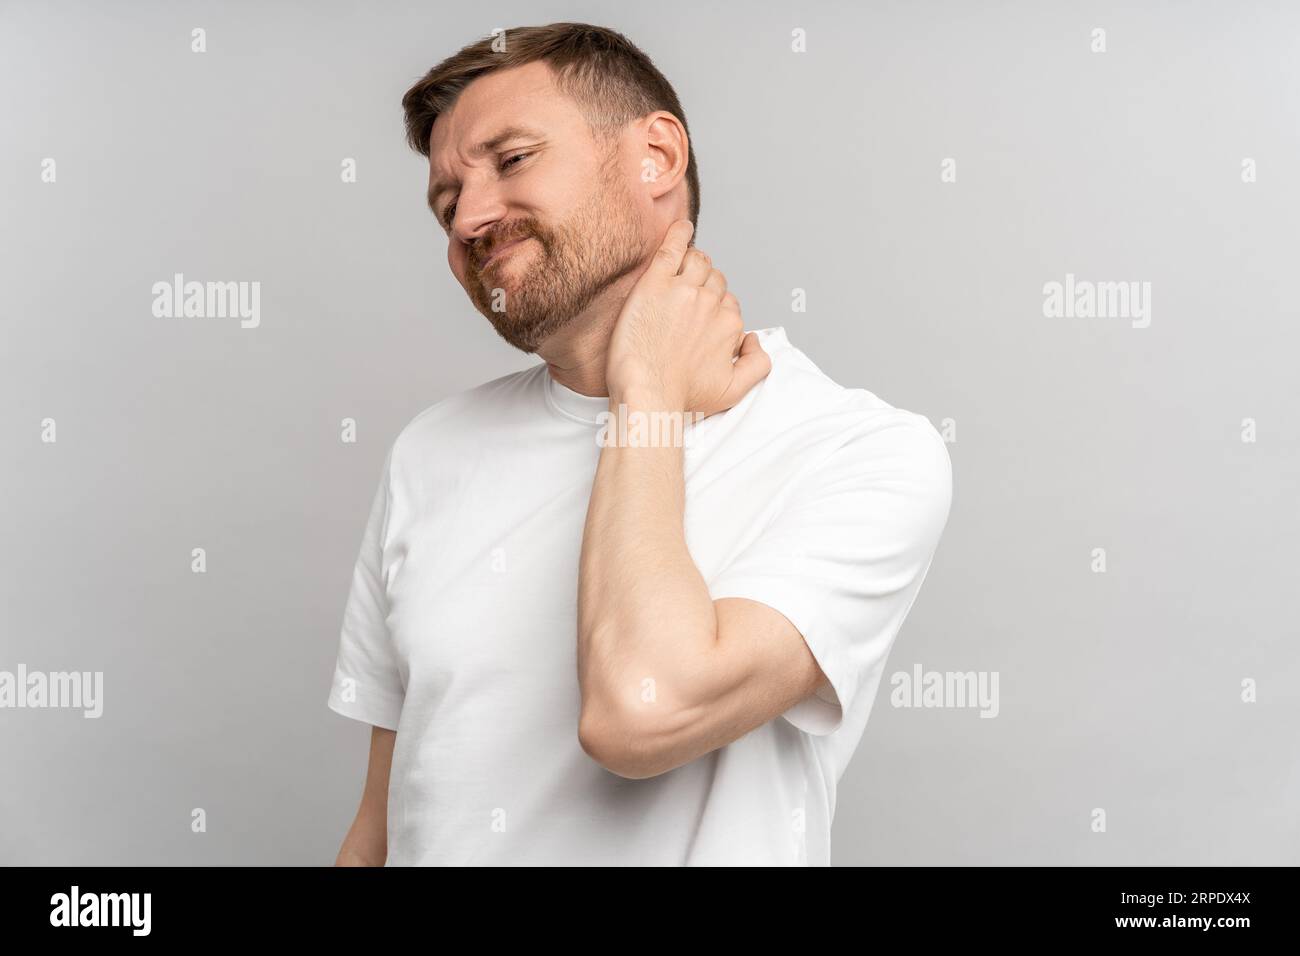 Unhealthy man suffering painful neck ache after sports exercise. Back pain and hernia, sedentary.  Stock Photo